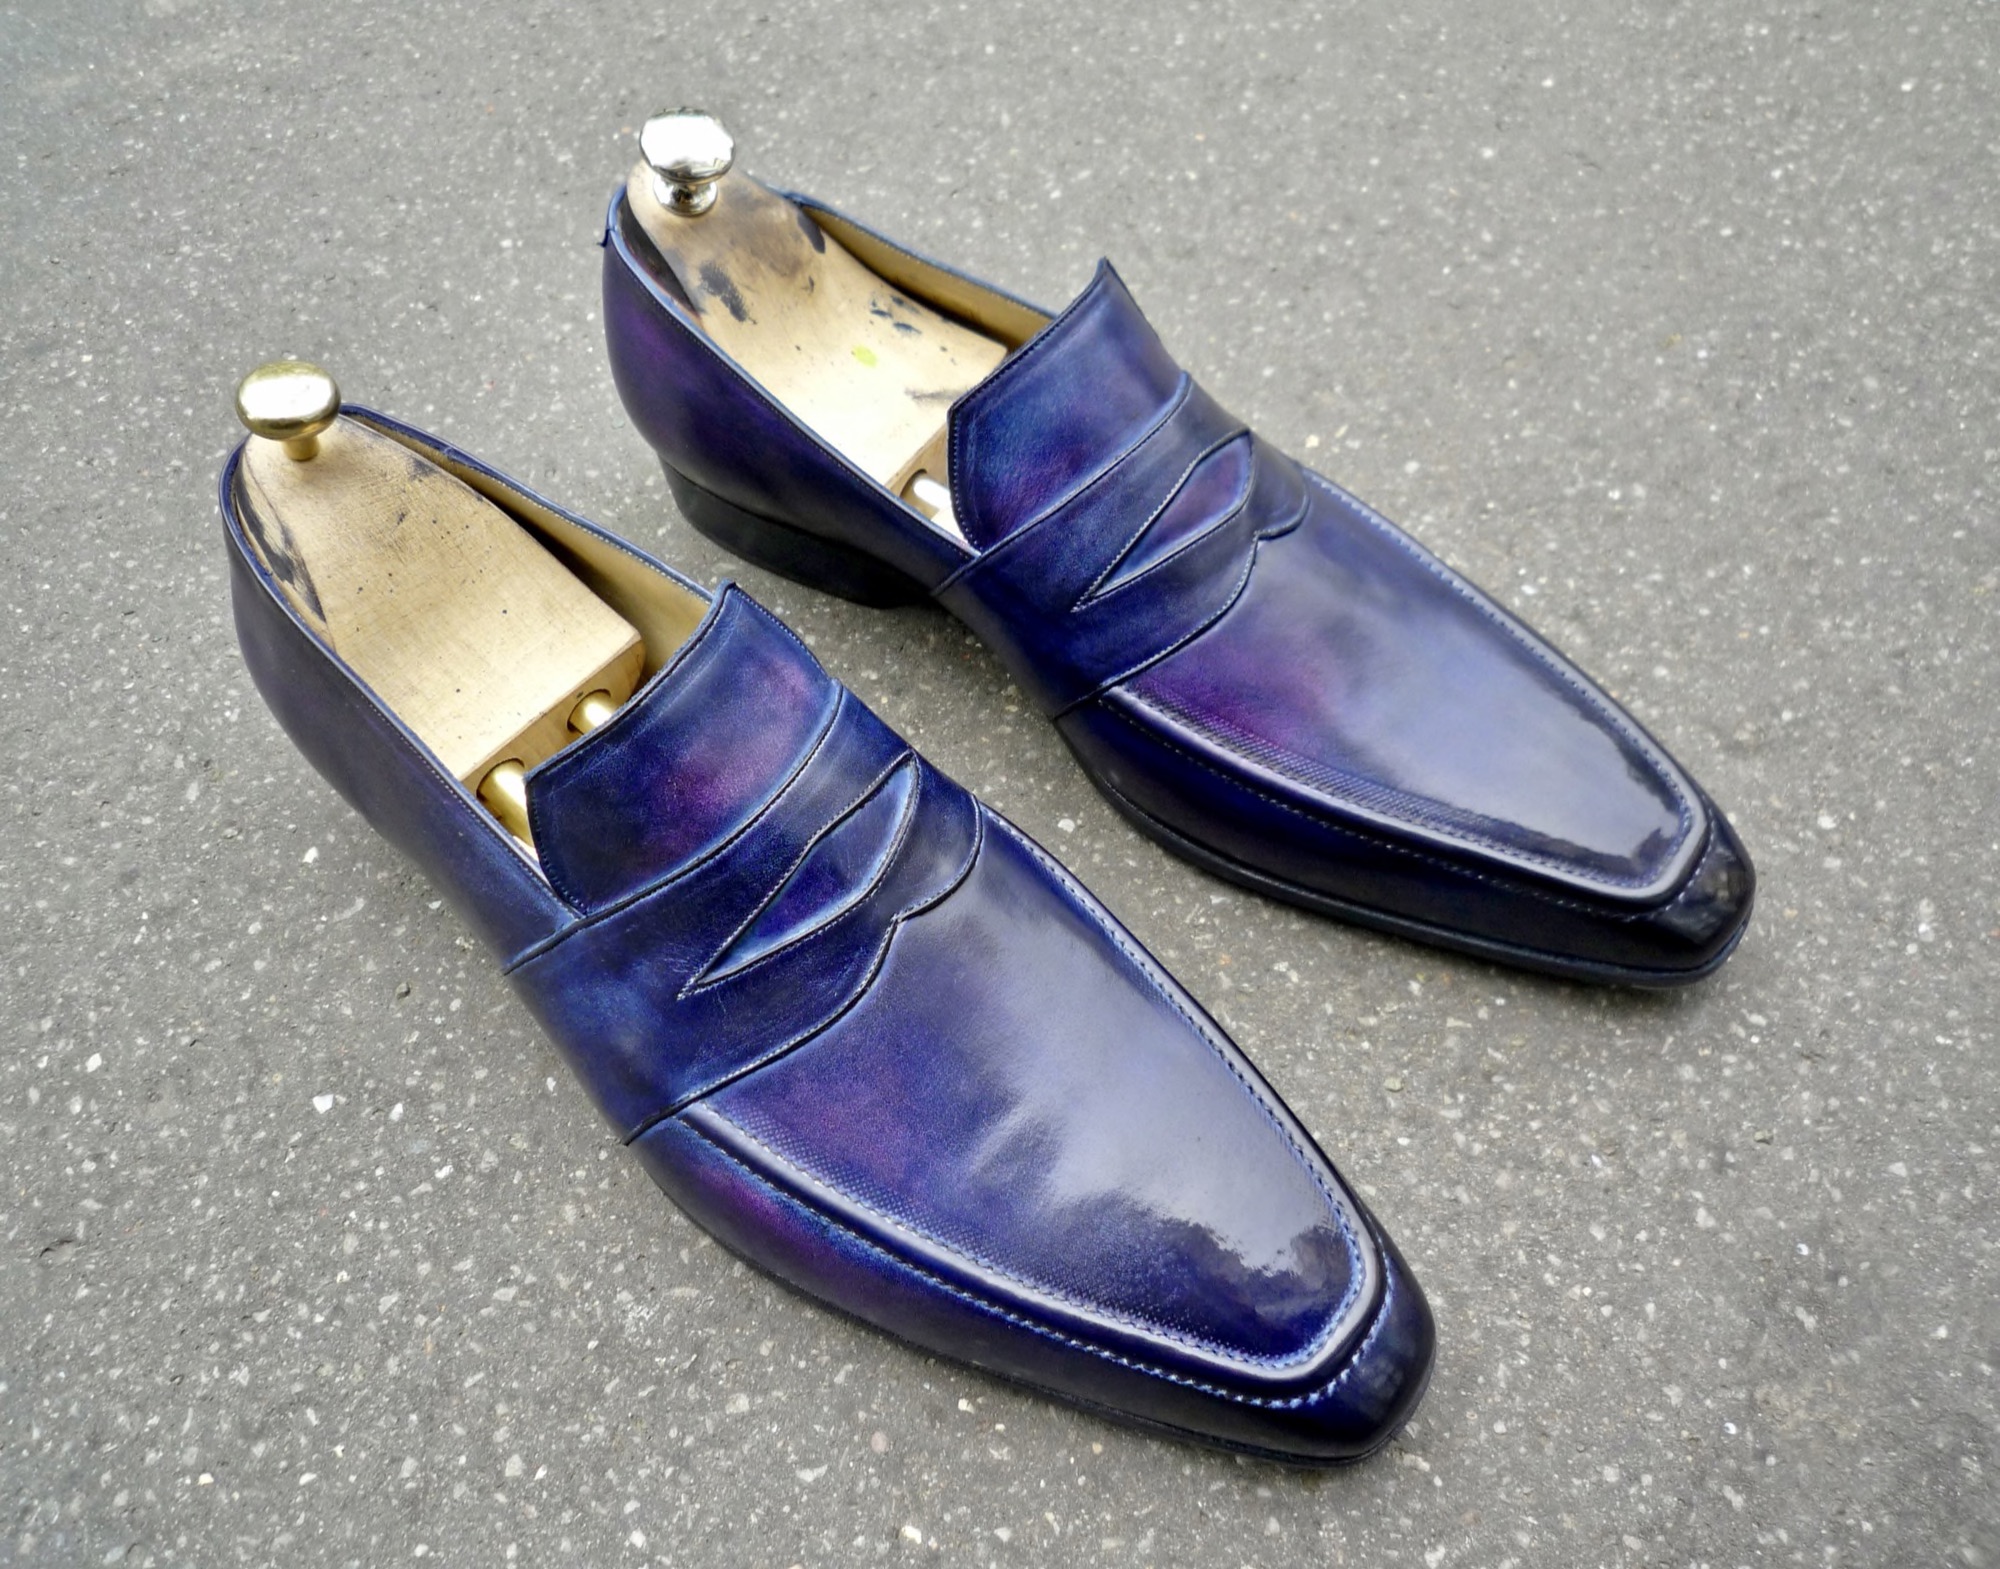 BERLUTI Cuir Brule Patina Loafer Shoes